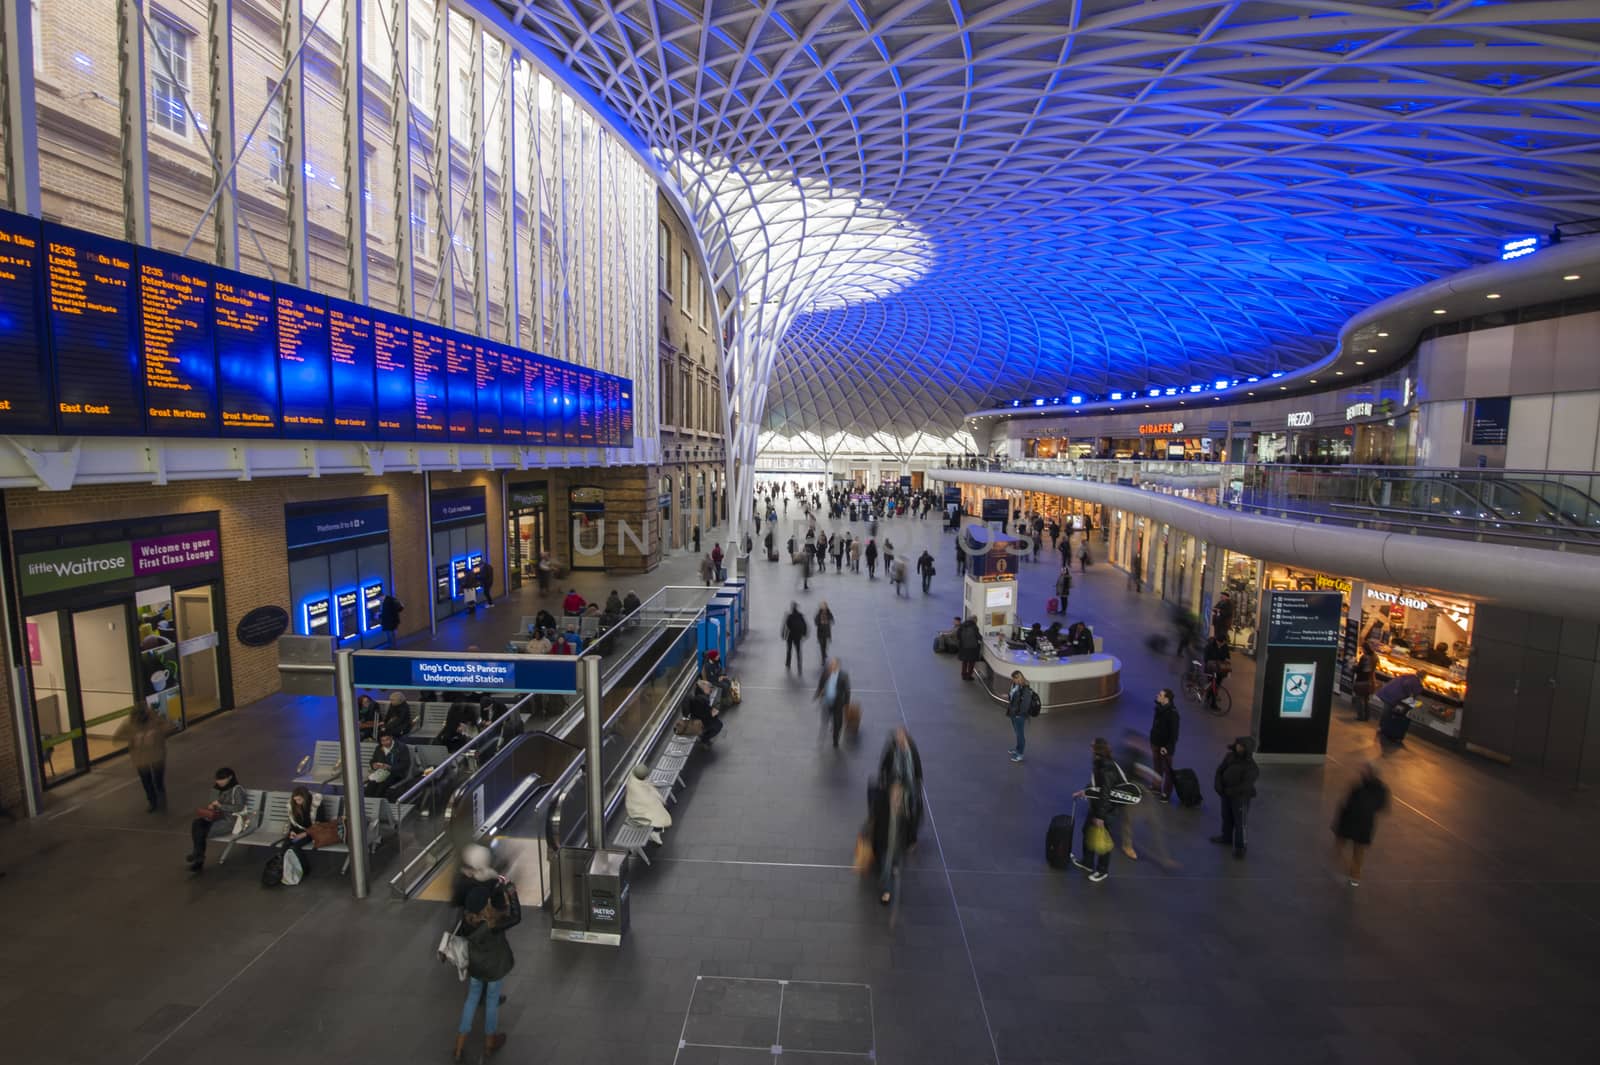 LONDON, ENGLAND - FEBRUARY 3RD 2015:  London commuters travel through Kings Cross train station on February 3rd 2015. London commuters recently said they were unhappy in a recent survey on train travel.